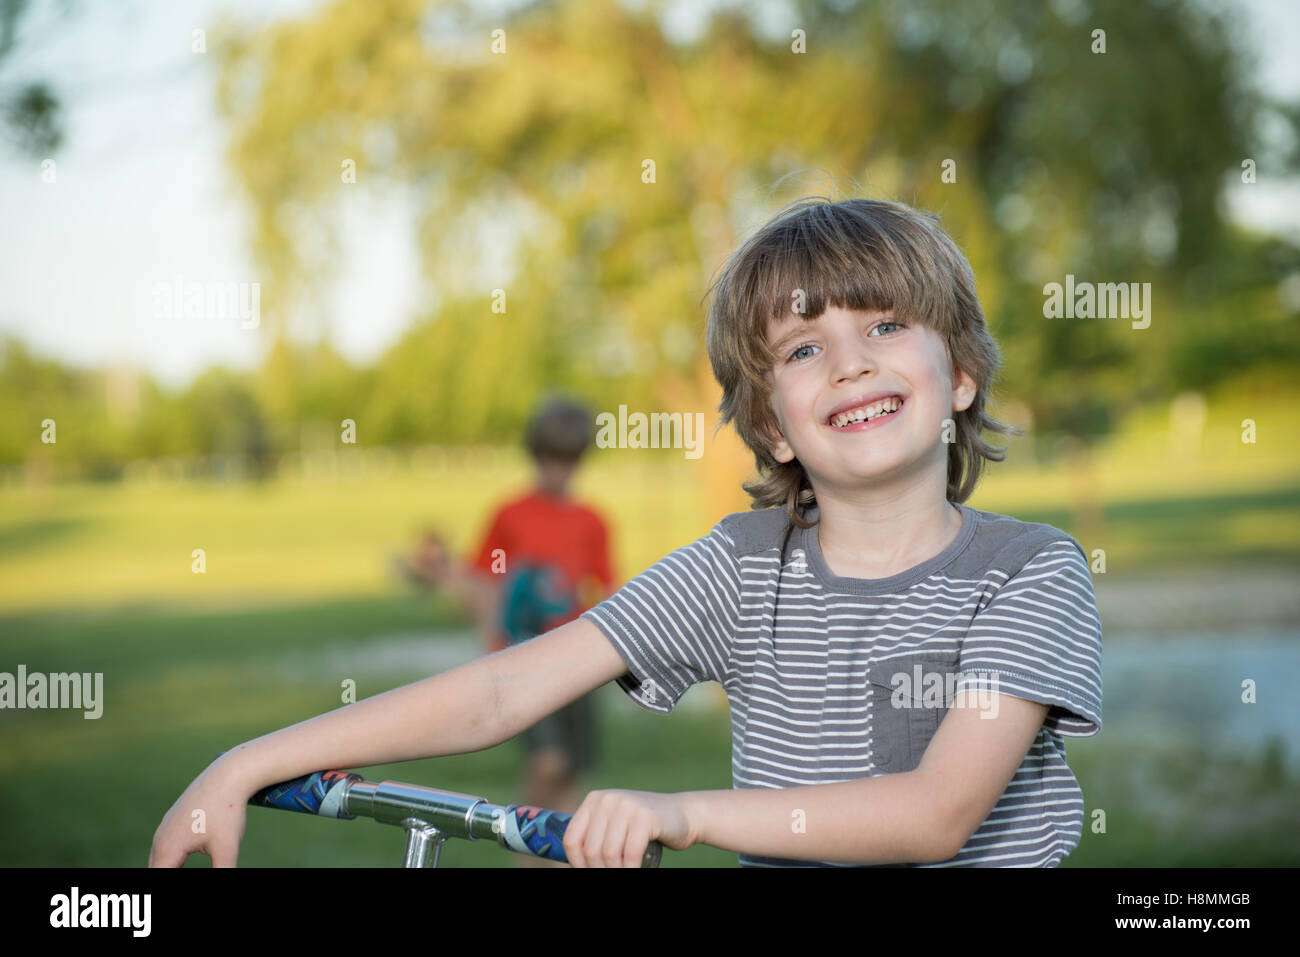 Portrait of a young boy in a park with blurred background Stock Photo